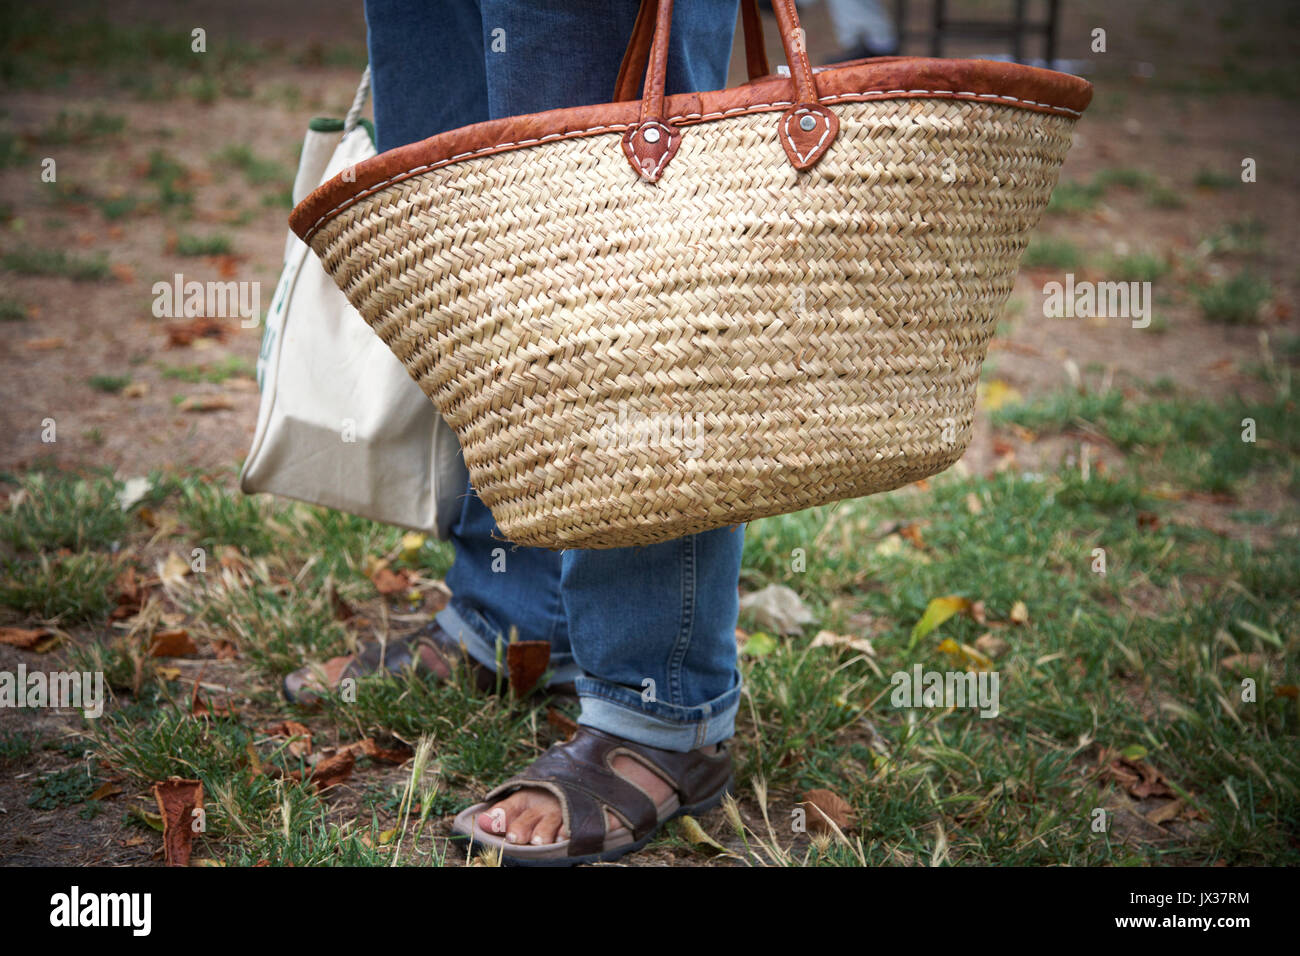 man with basket of fresh produce at a farmers market new zealand Stock Photo